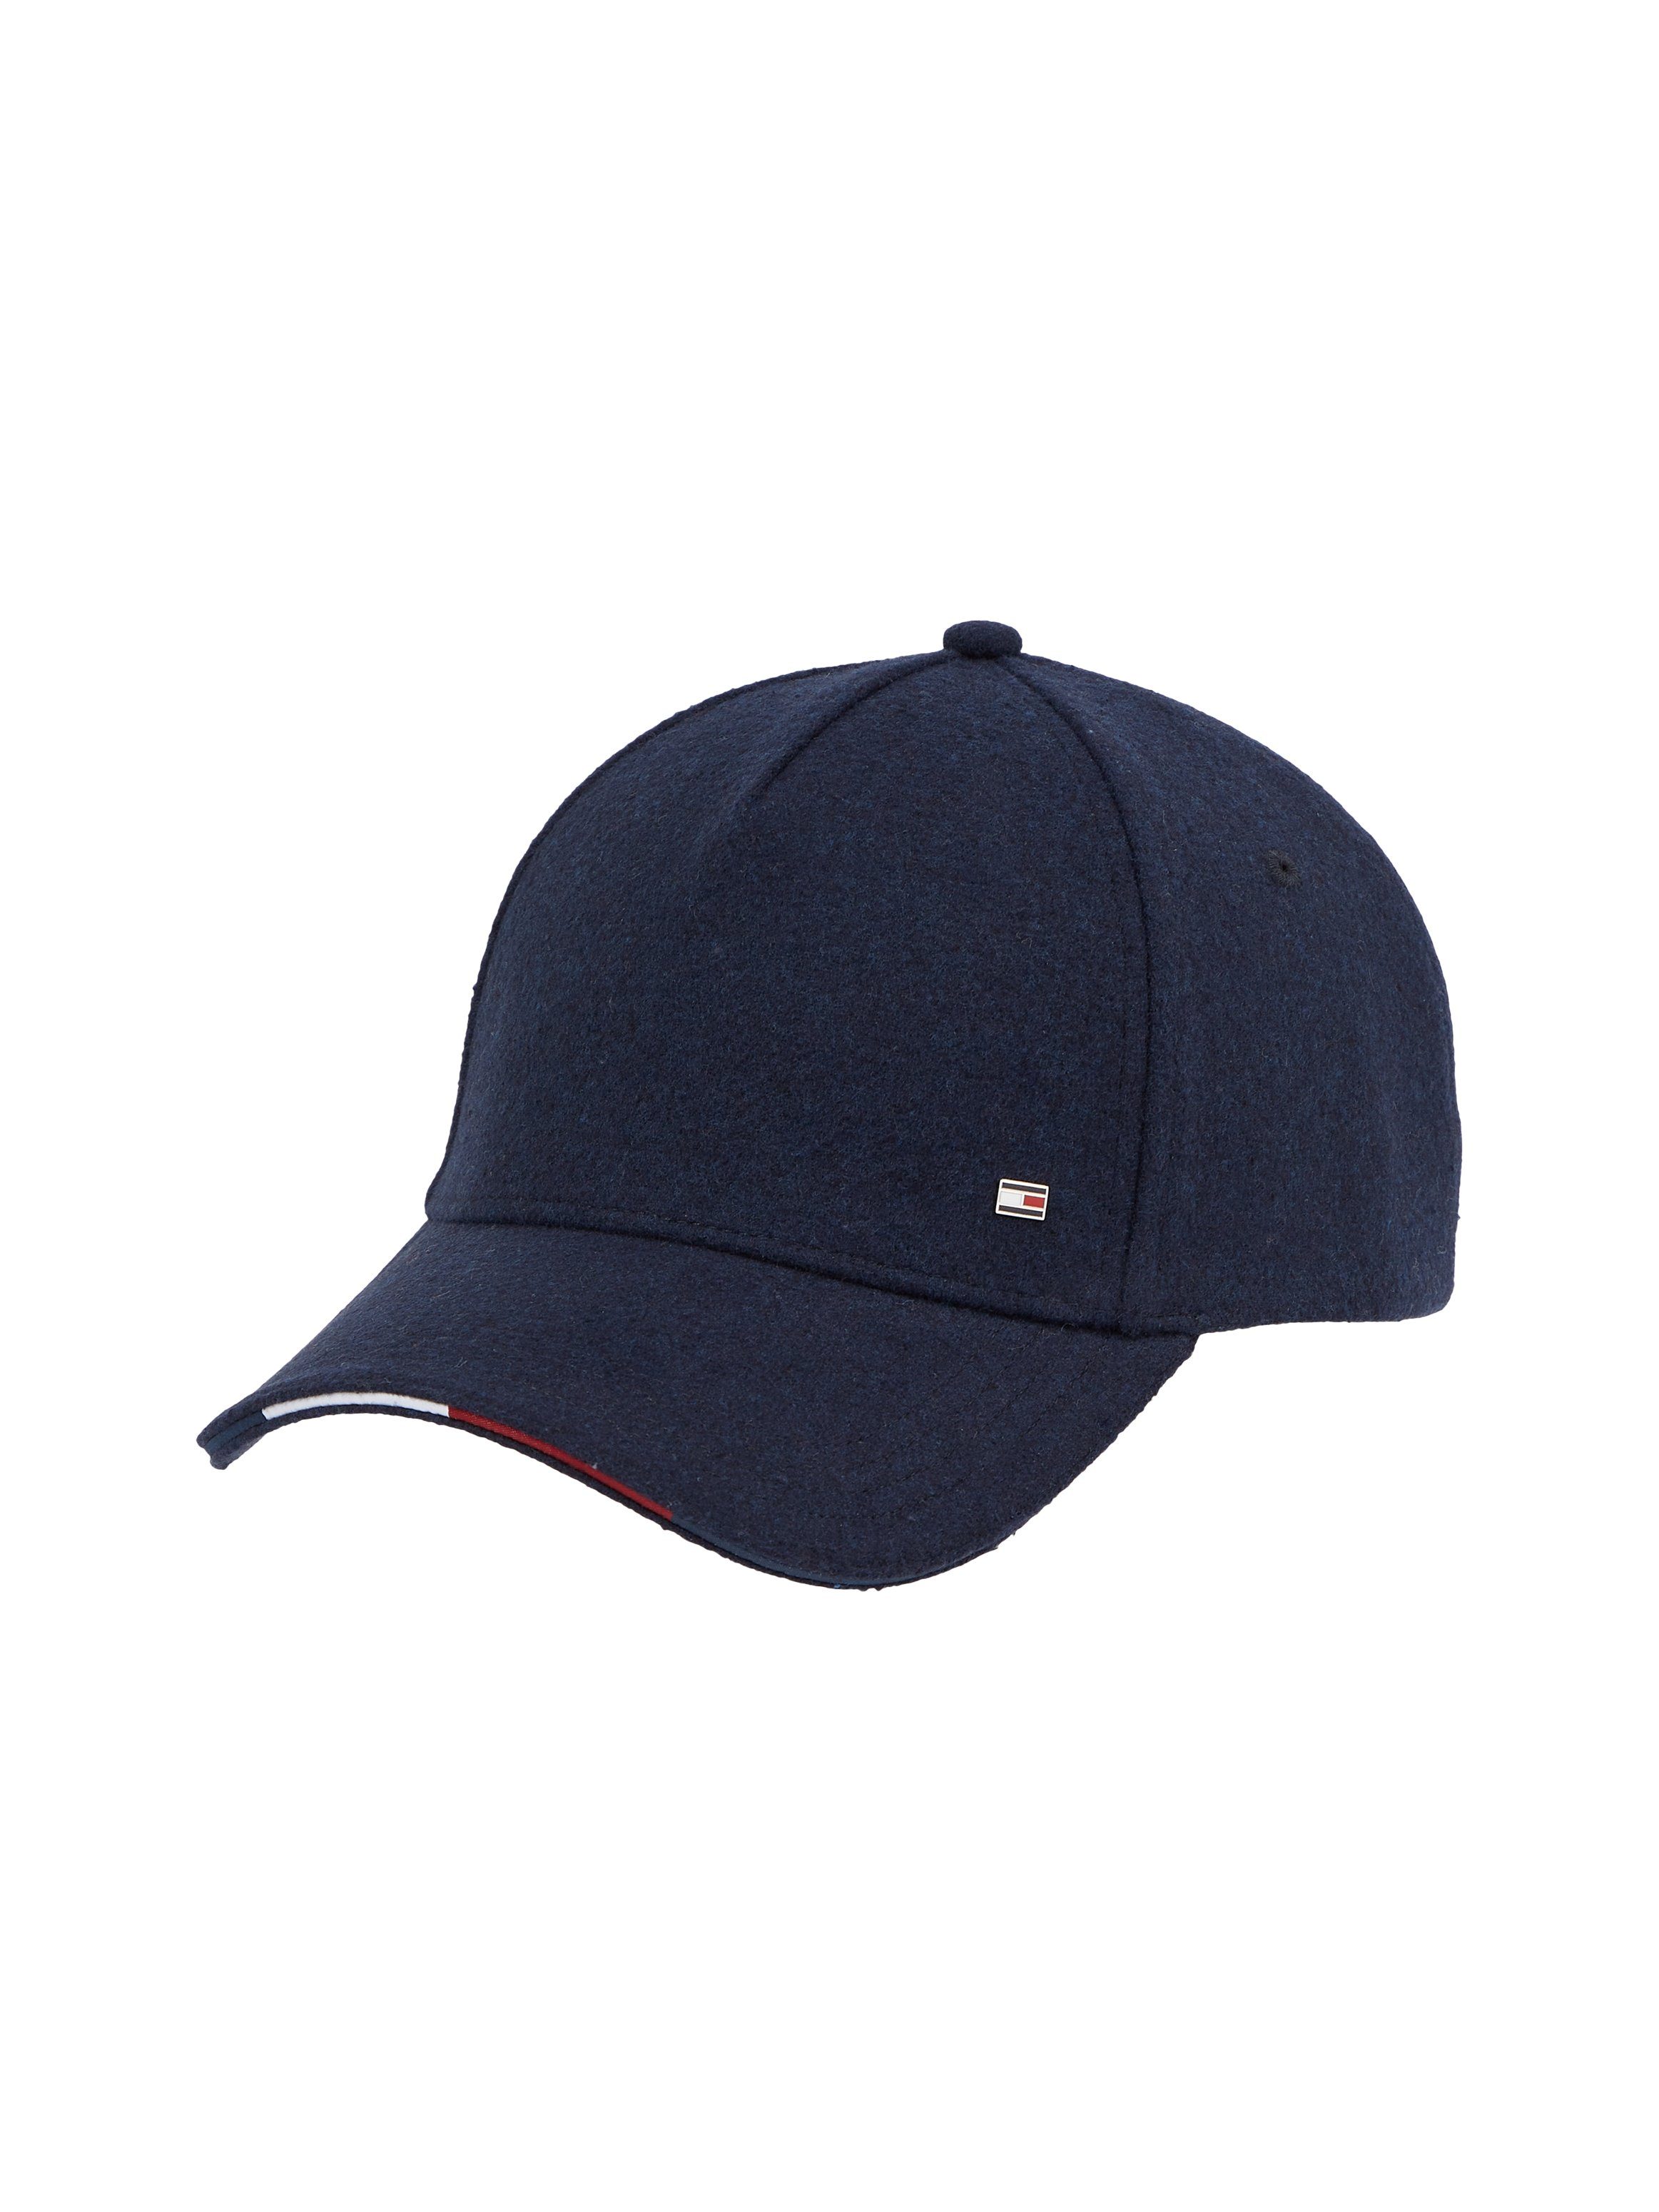 Cap Tommy-Tape CAP Tommy CORPORATE Hilfiger Baseball mit Blue Flag ELEVATED und Space